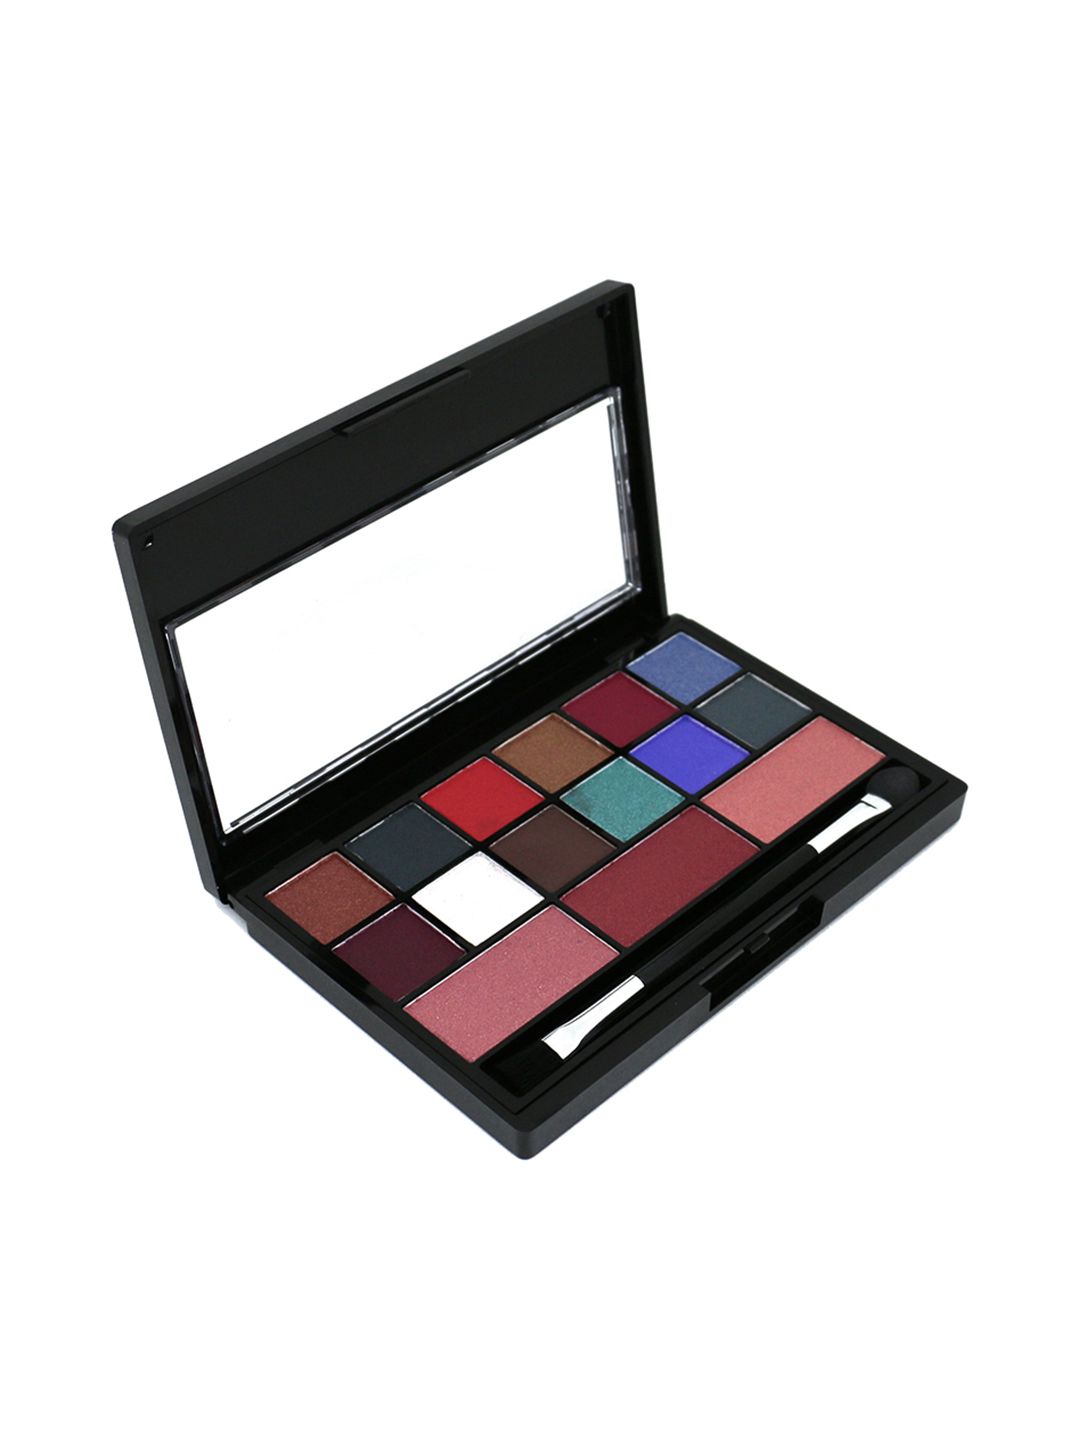 Miss Claire 9952-2 Eye Shadow Kit Price in India